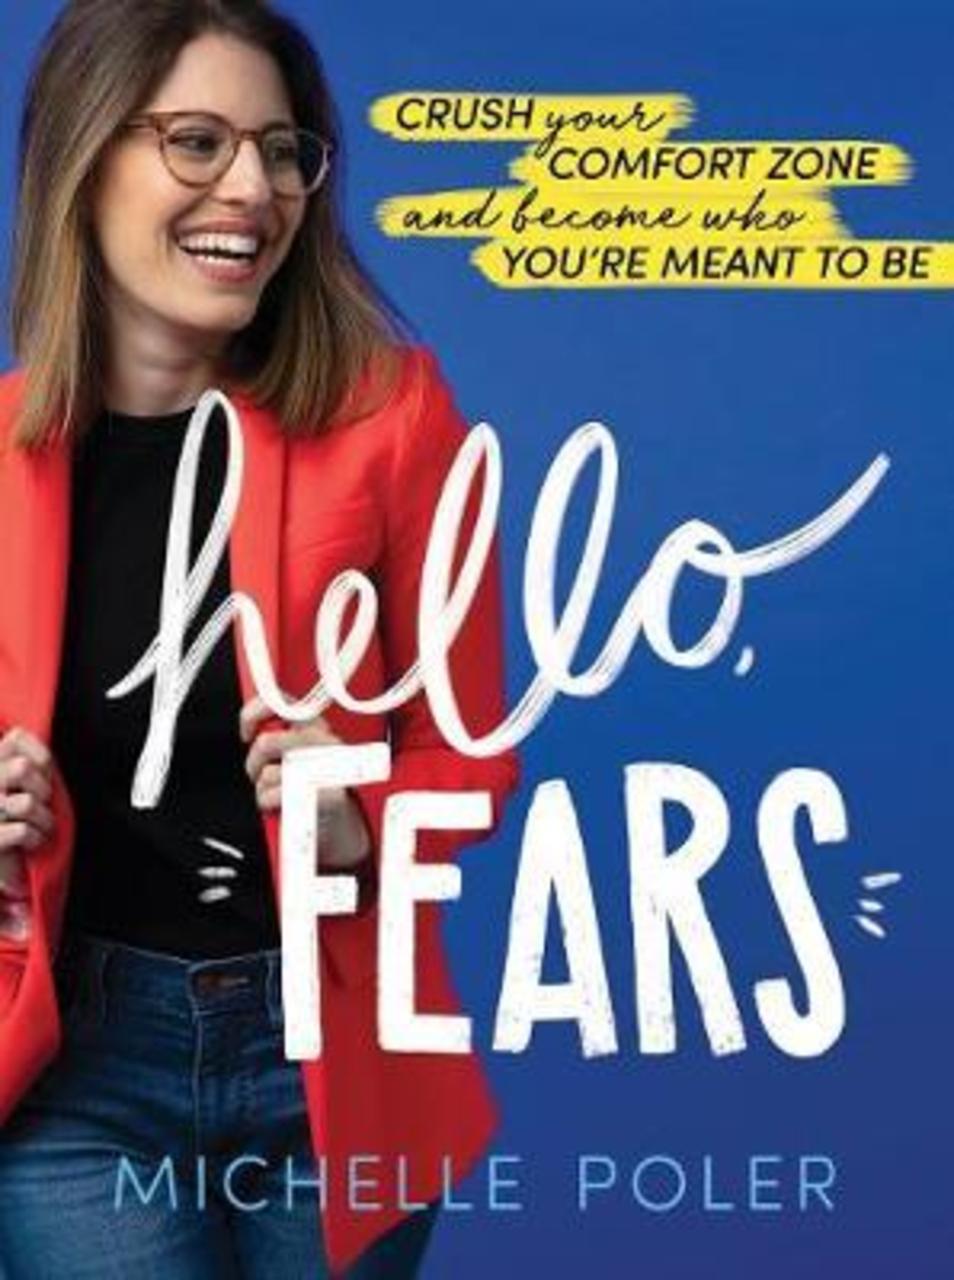 Sách - Hello, Fears : Crush Your Comfort Zone and Become Who You're Meant to B by Michelle Poler (US edition, hardcover)